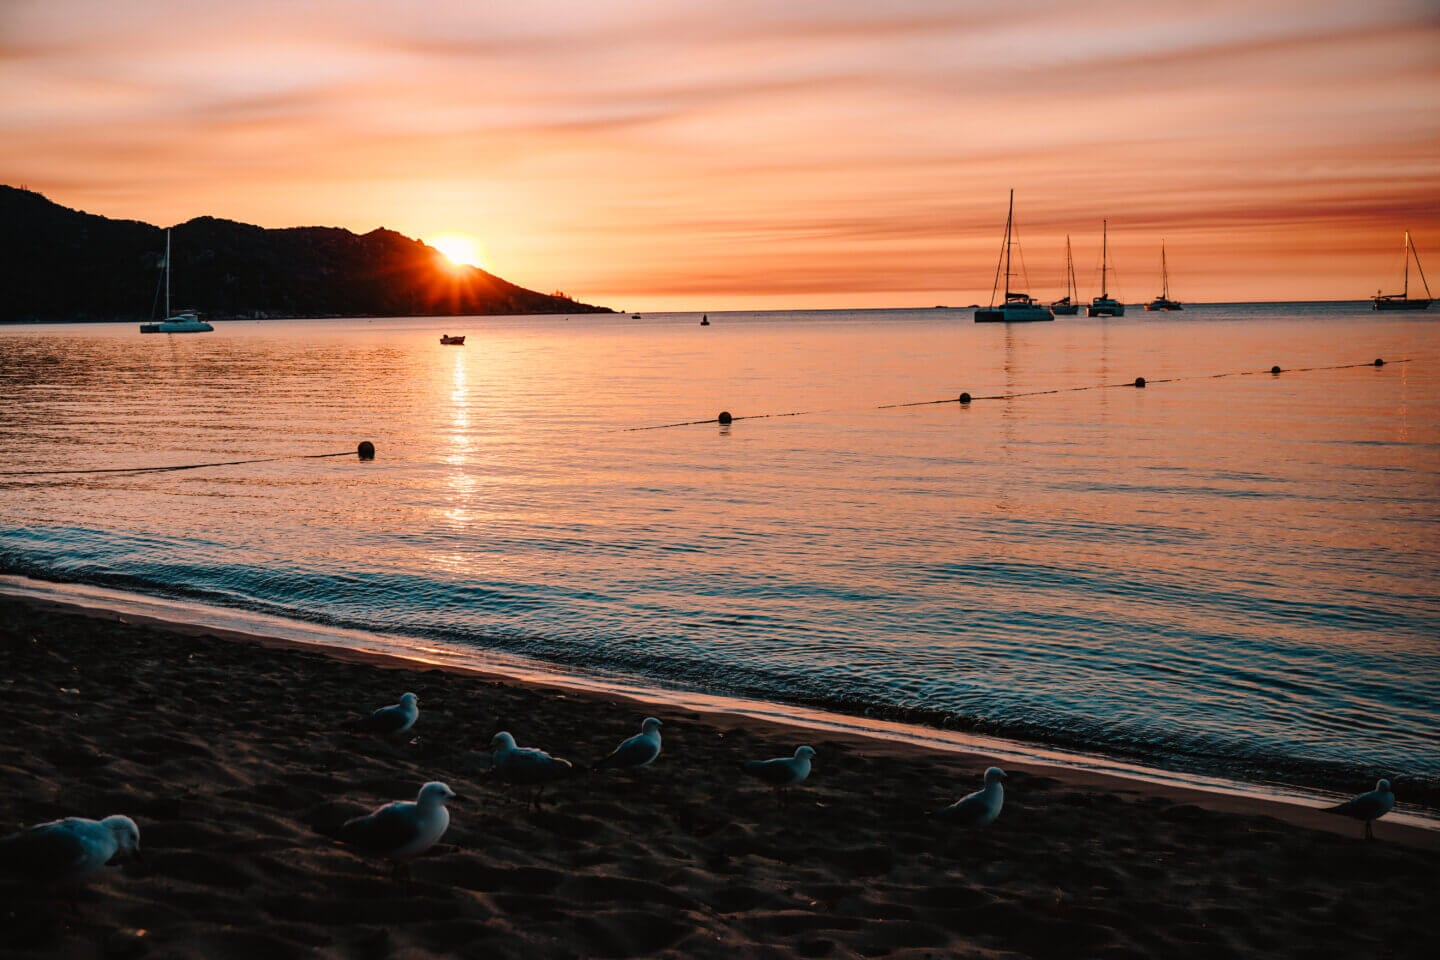 The sunsets in Horseshoe Bay on Magnetic Island with boats in the bay